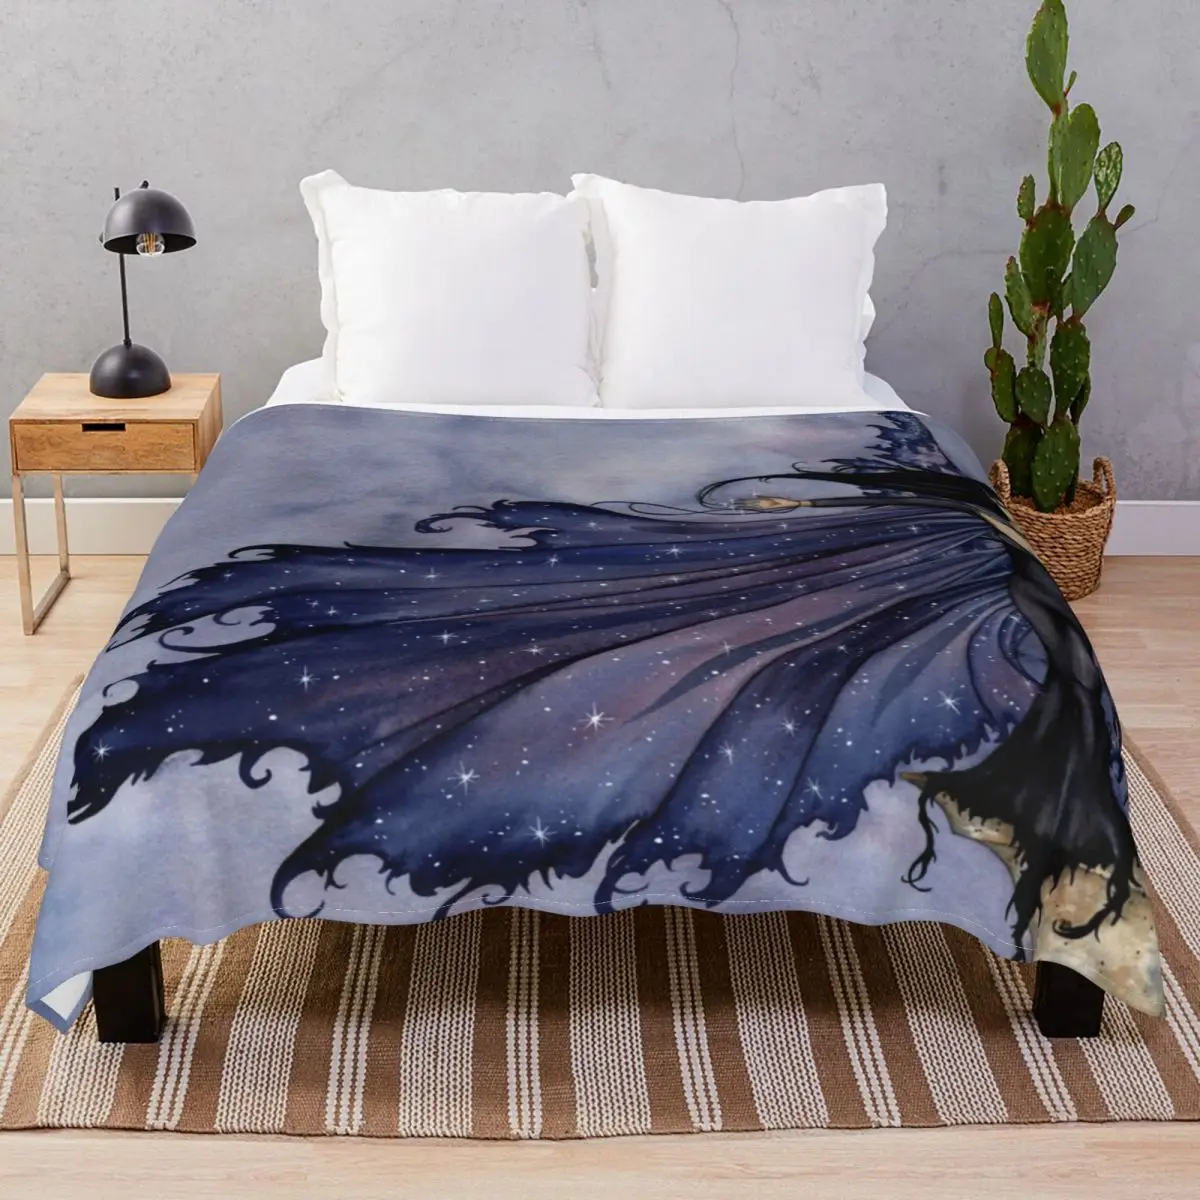 Cloak Of Stars Blankets Flannel All Season Super Warm Throw Blanket for Bed Sofa Camp Office